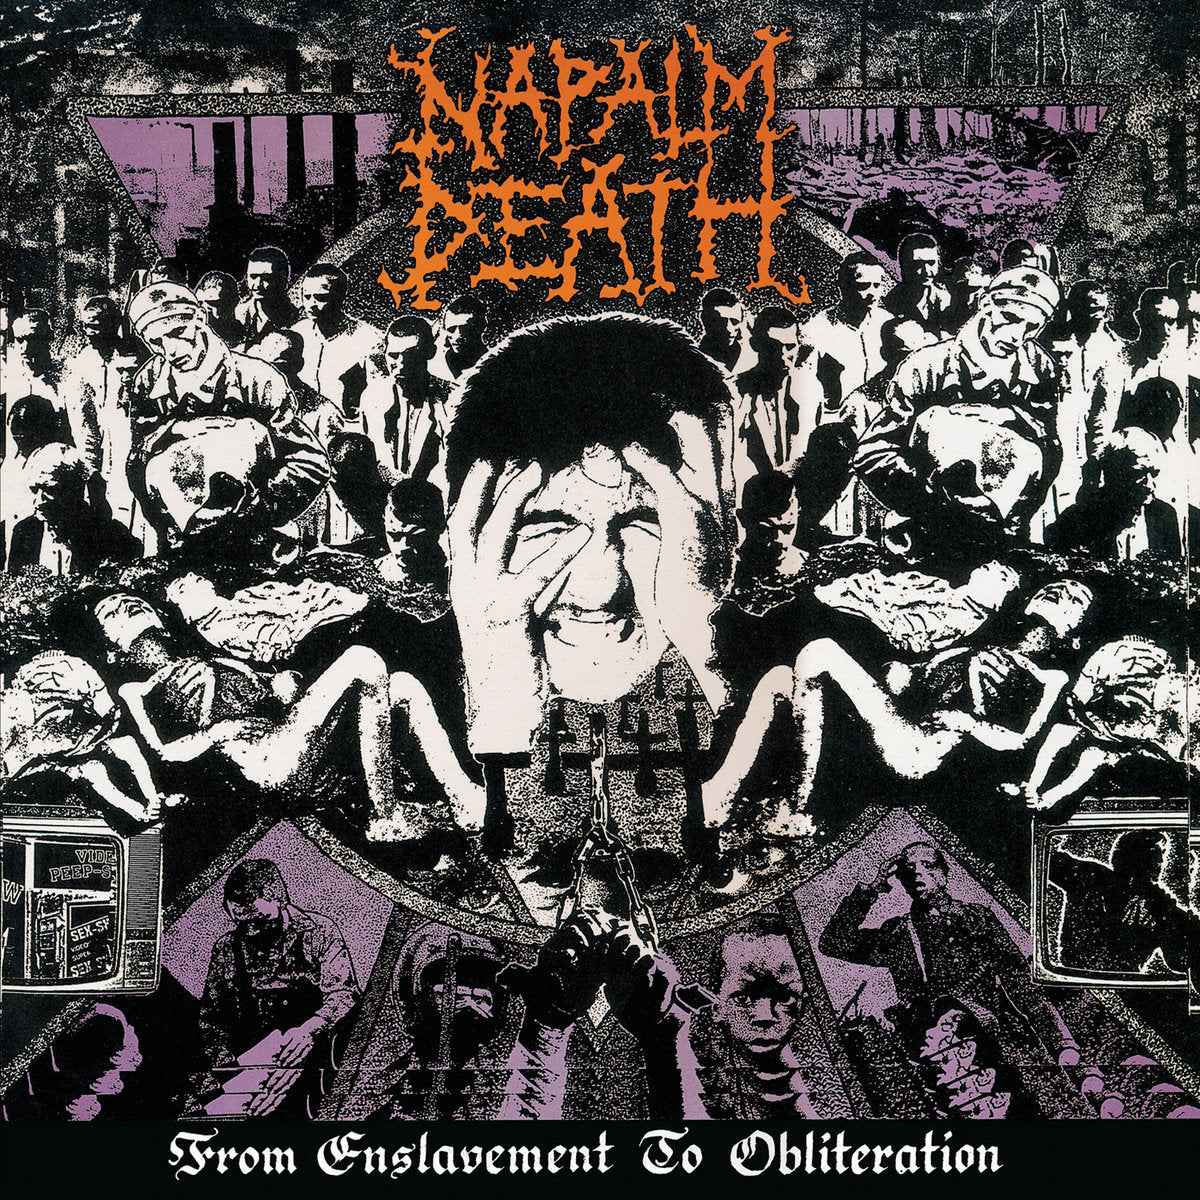 Napalm Death "From Enslavement To Obliteration" FDR Deep Purple Vinyl (Ltd to 300 Copies)